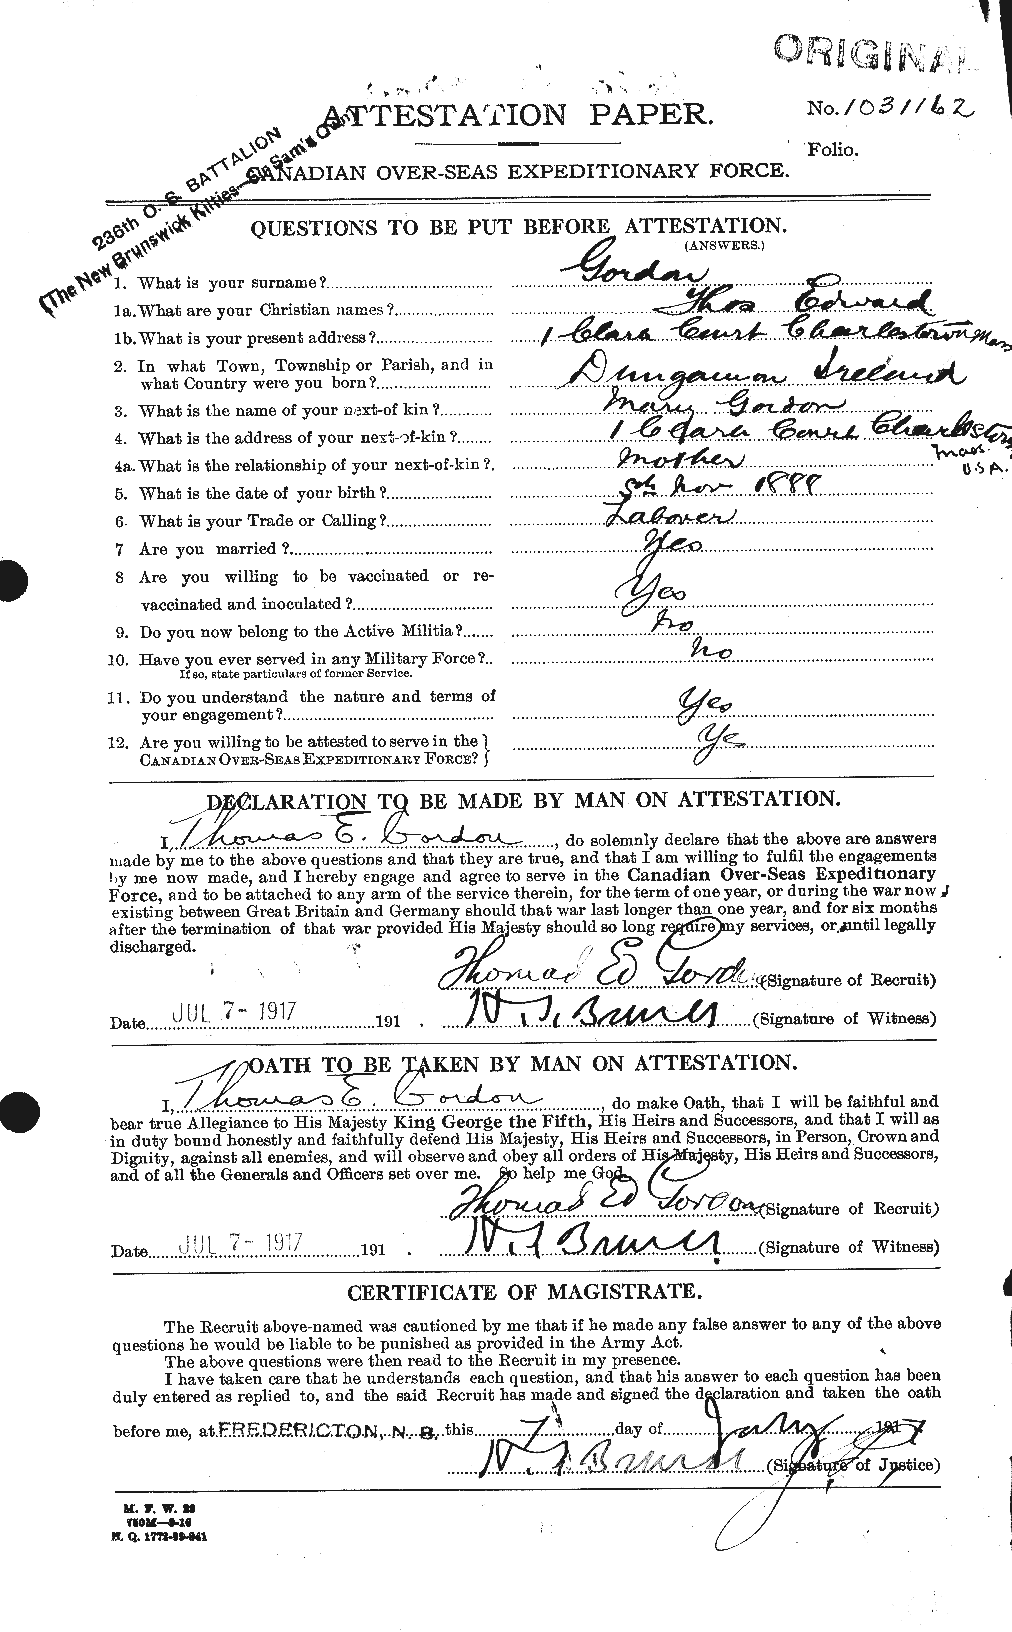 Personnel Records of the First World War - CEF 355999a